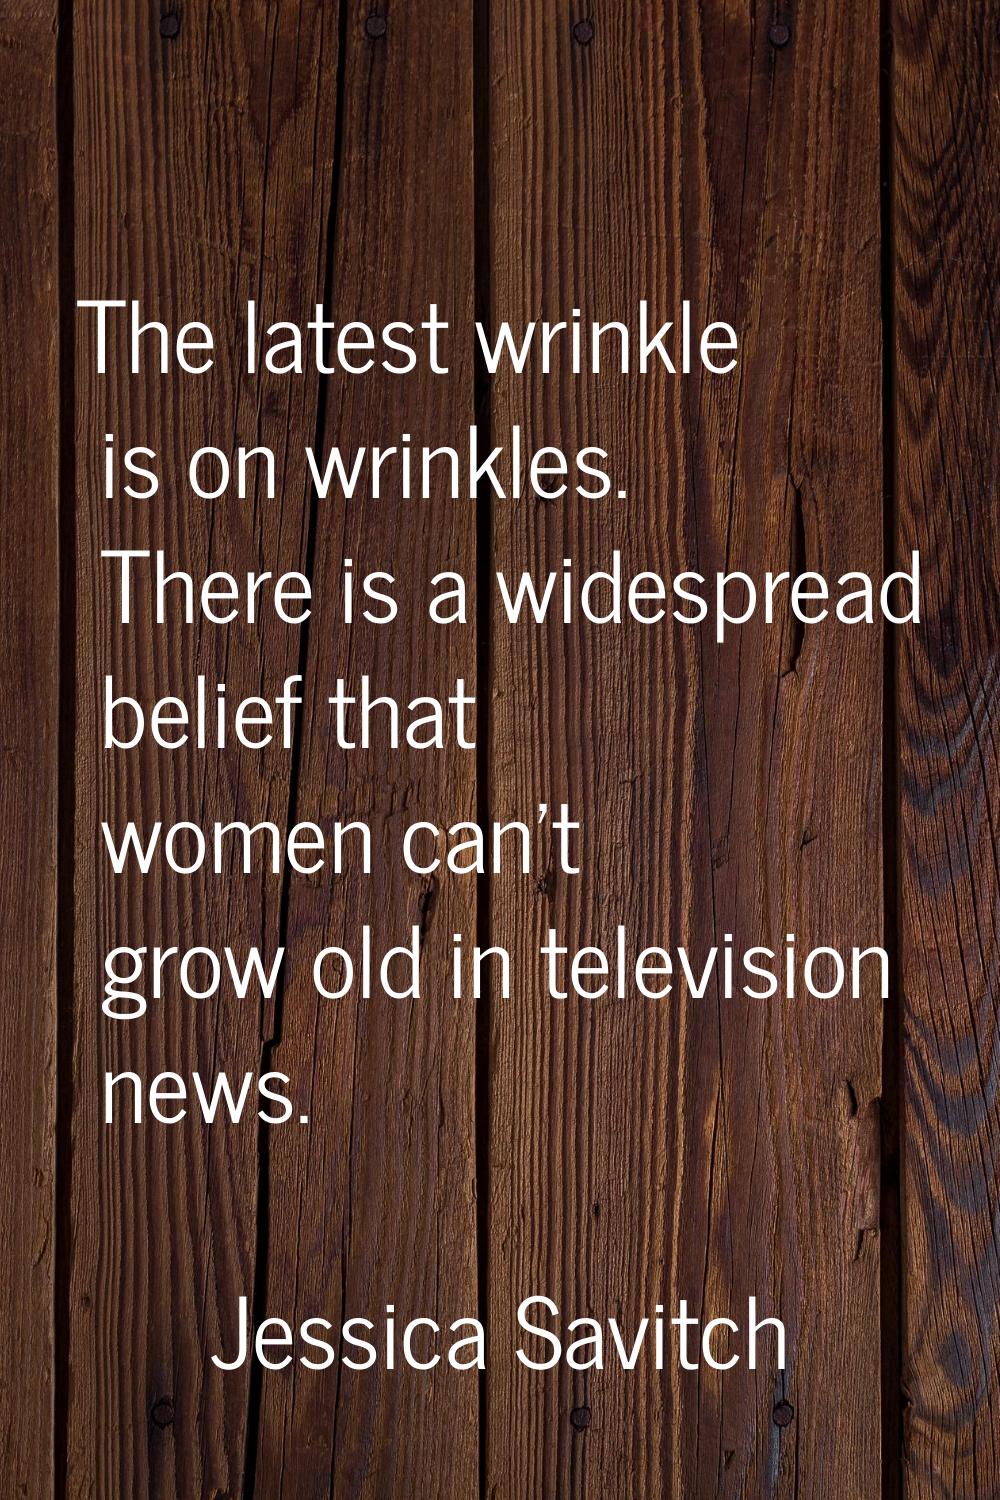 The latest wrinkle is on wrinkles. There is a widespread belief that women can't grow old in televi